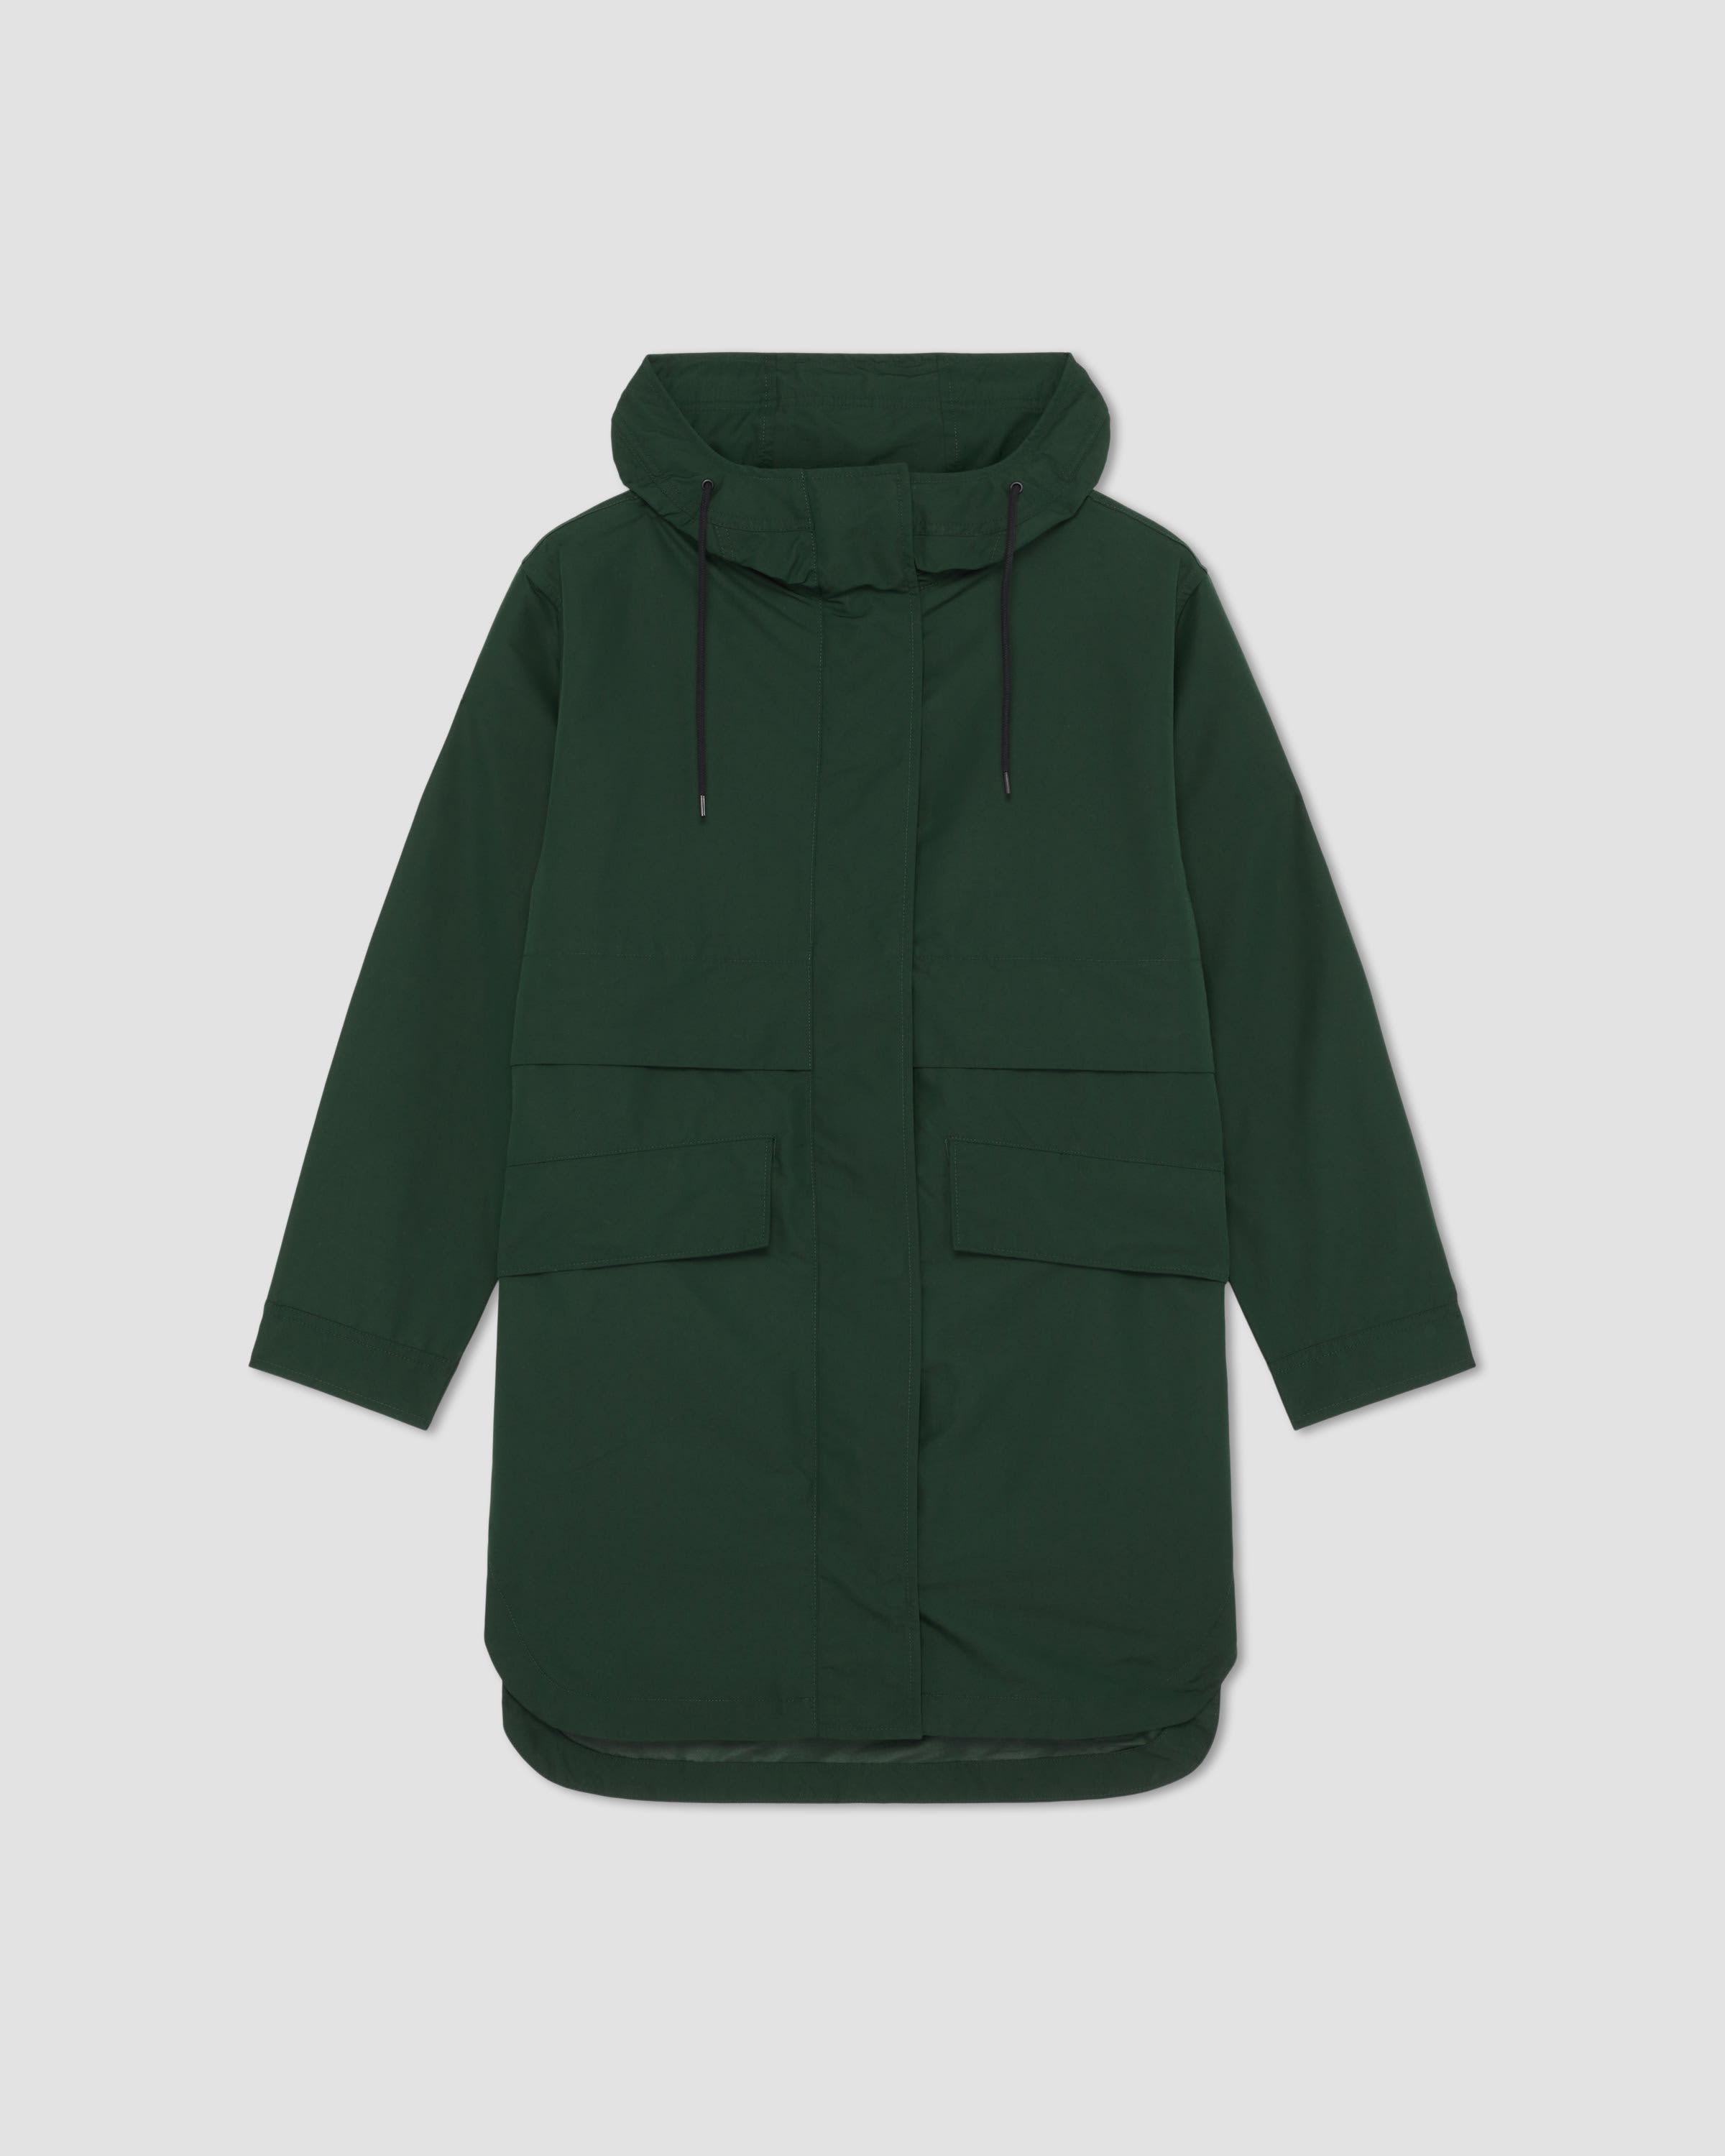 Everlane ReNew Anorak Review: Photos and Our Honest Thoughts